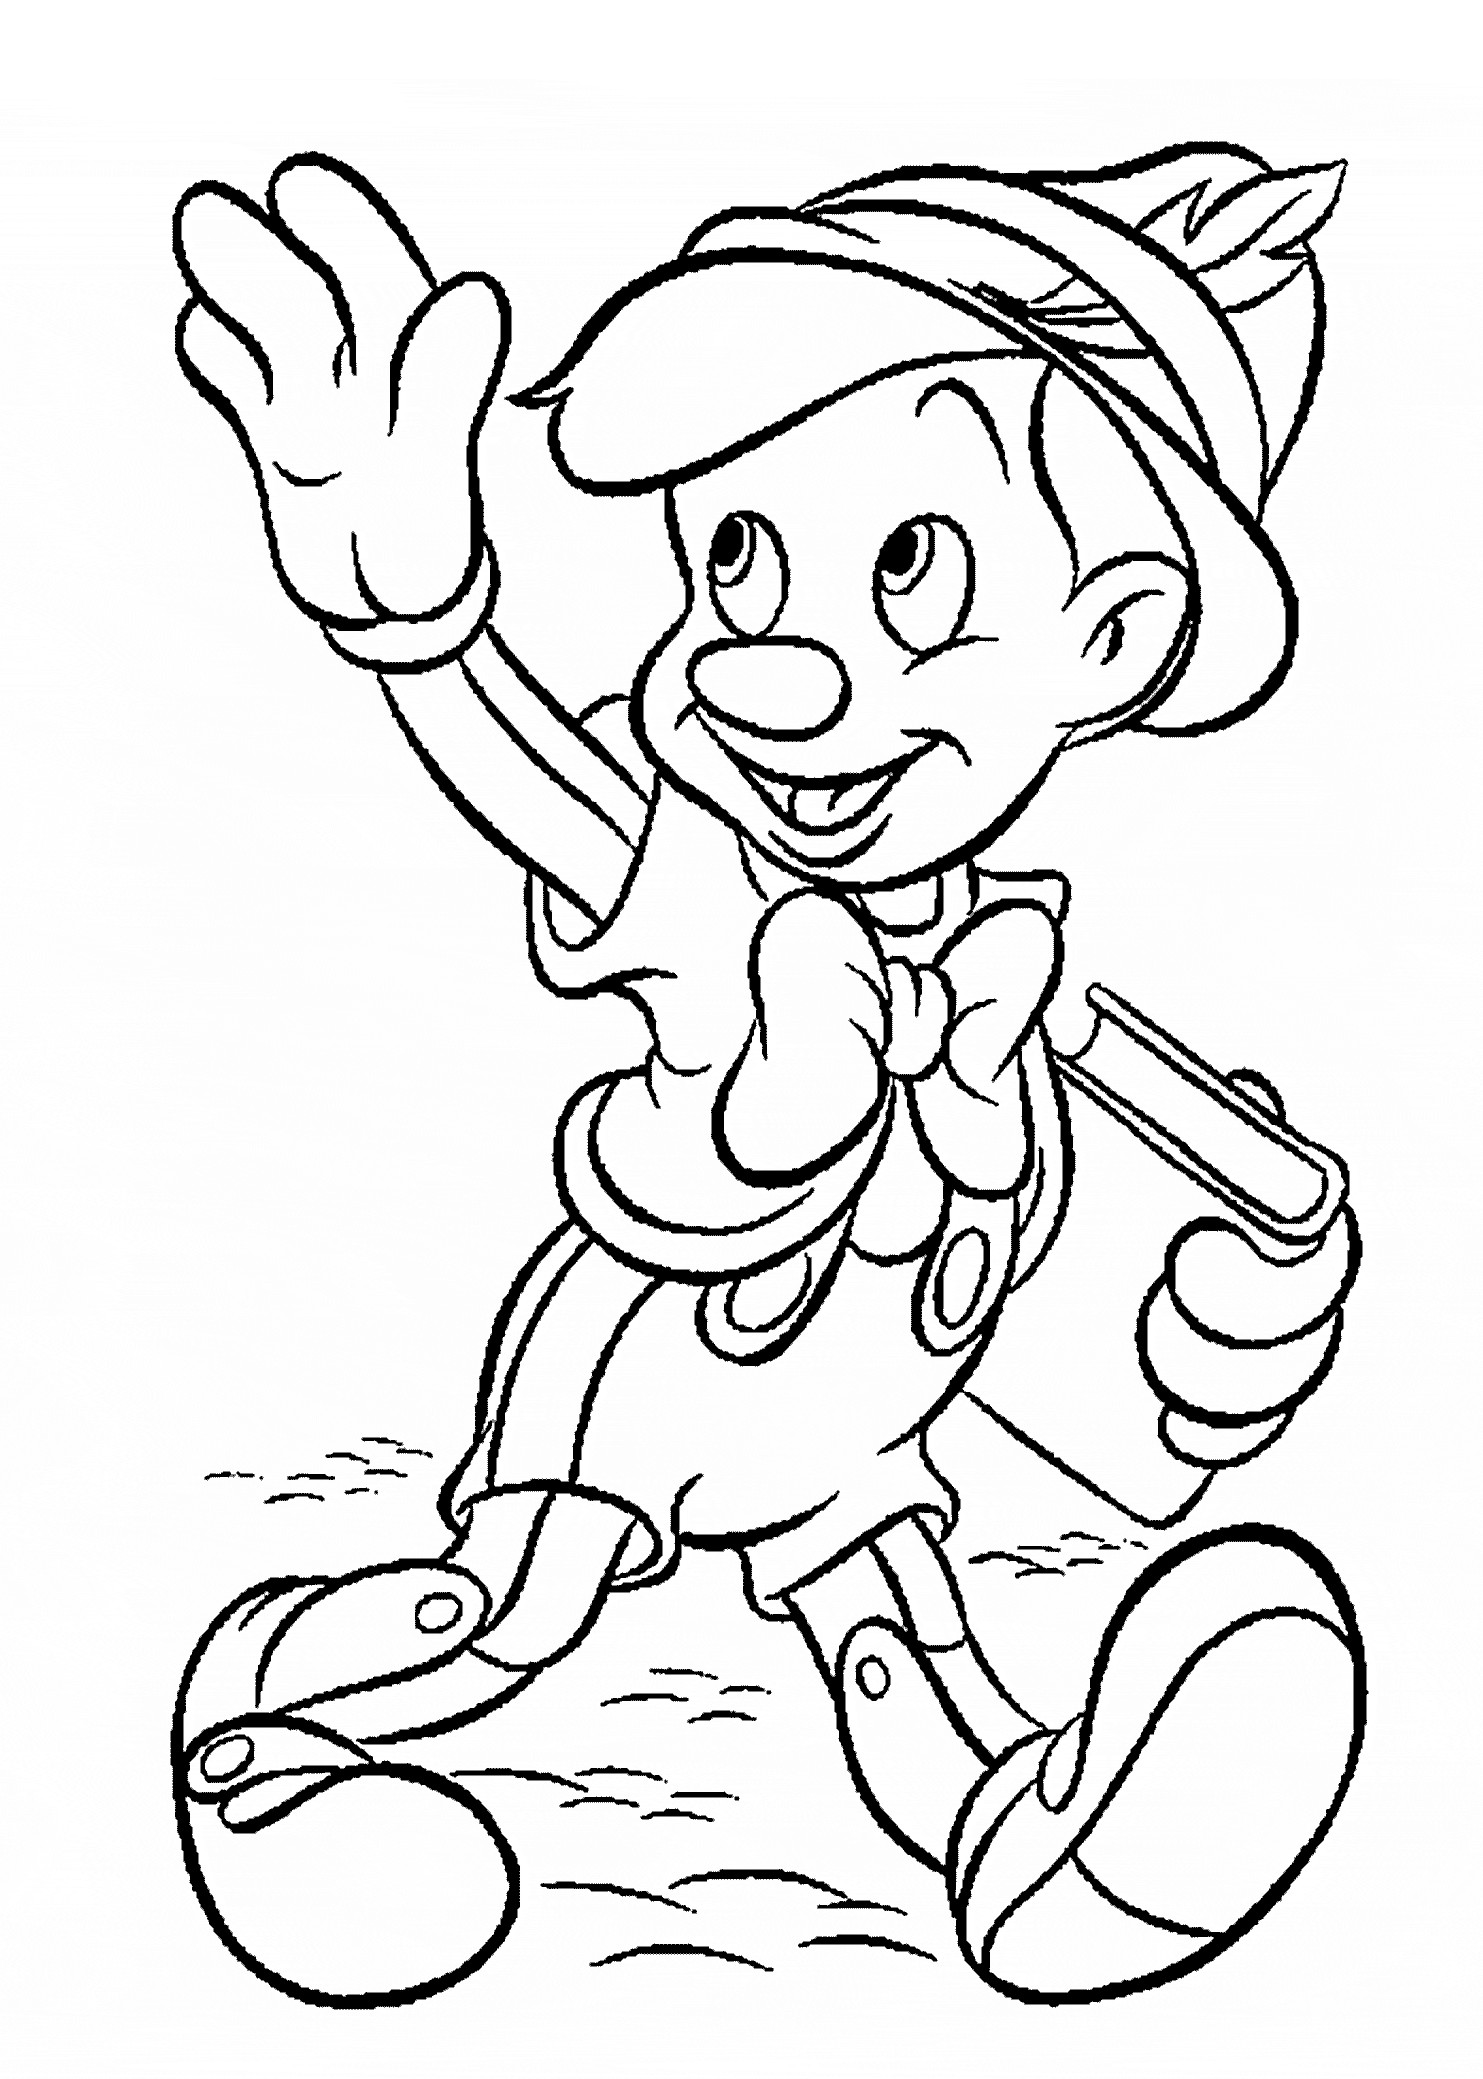 Free Coloring Pages For Boys
 32 Awesome Free Coloring Pages for Boys Gianfreda